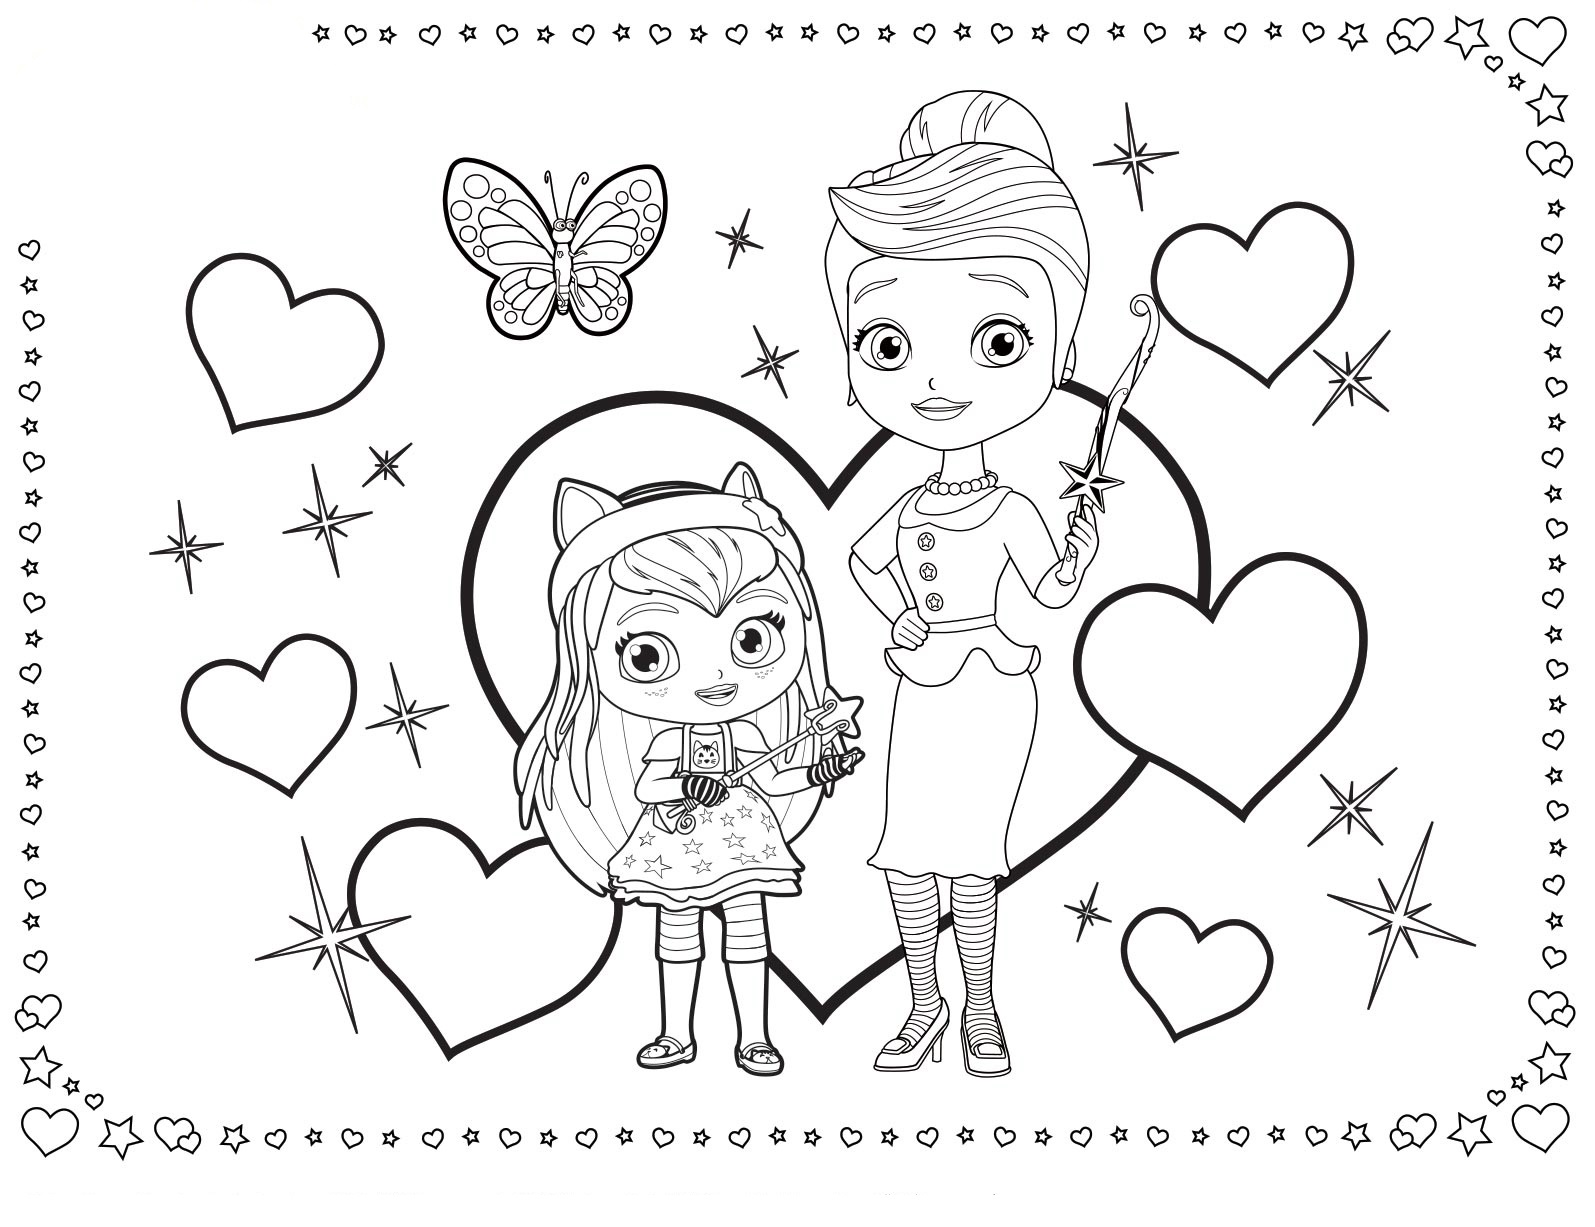 Hazel coloring page with mom